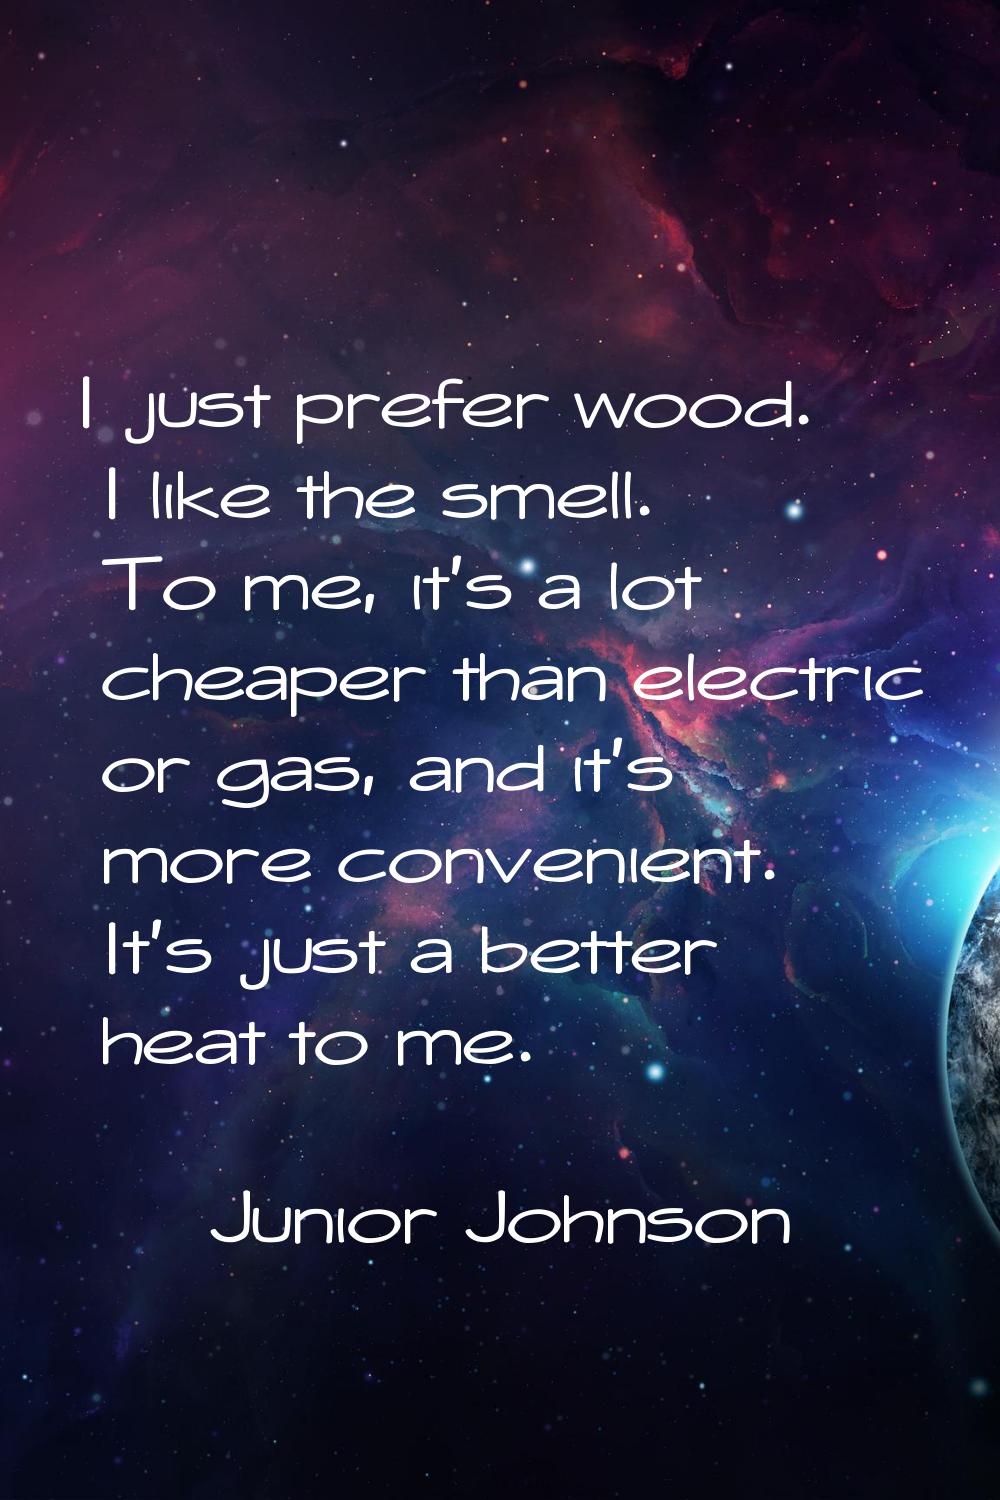 I just prefer wood. I like the smell. To me, it's a lot cheaper than electric or gas, and it's more